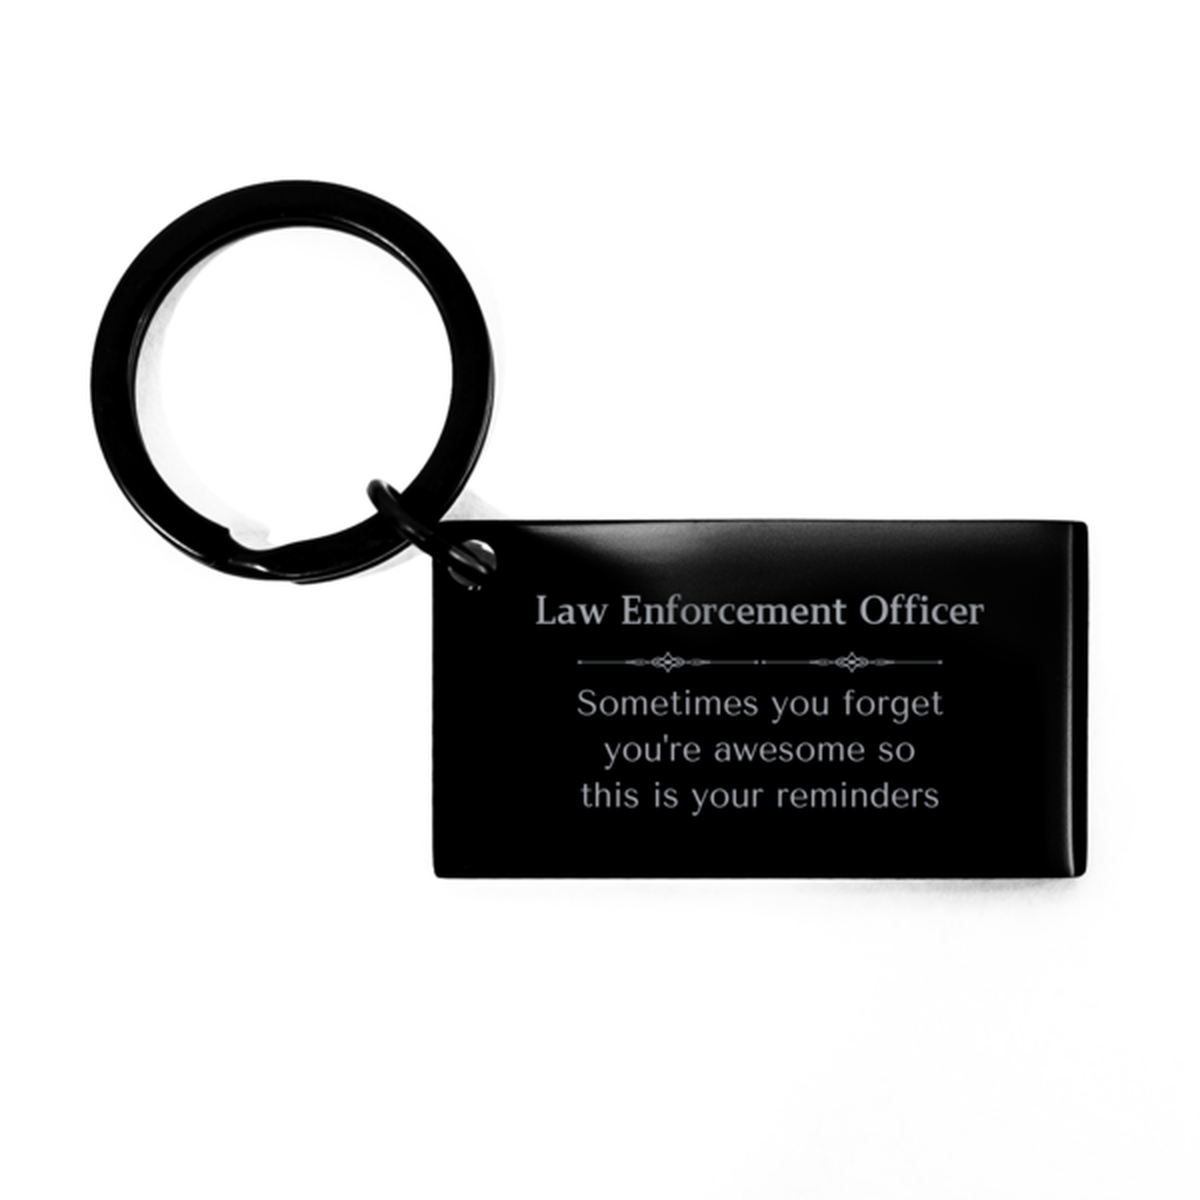 Sentimental Law Enforcement Officer Keychain, Naval Architect Sometimes you forget you're awesome so this is your reminders, Graduation Christmas Birthday Gifts for Law Enforcement Officer, Men, Women, Coworkers